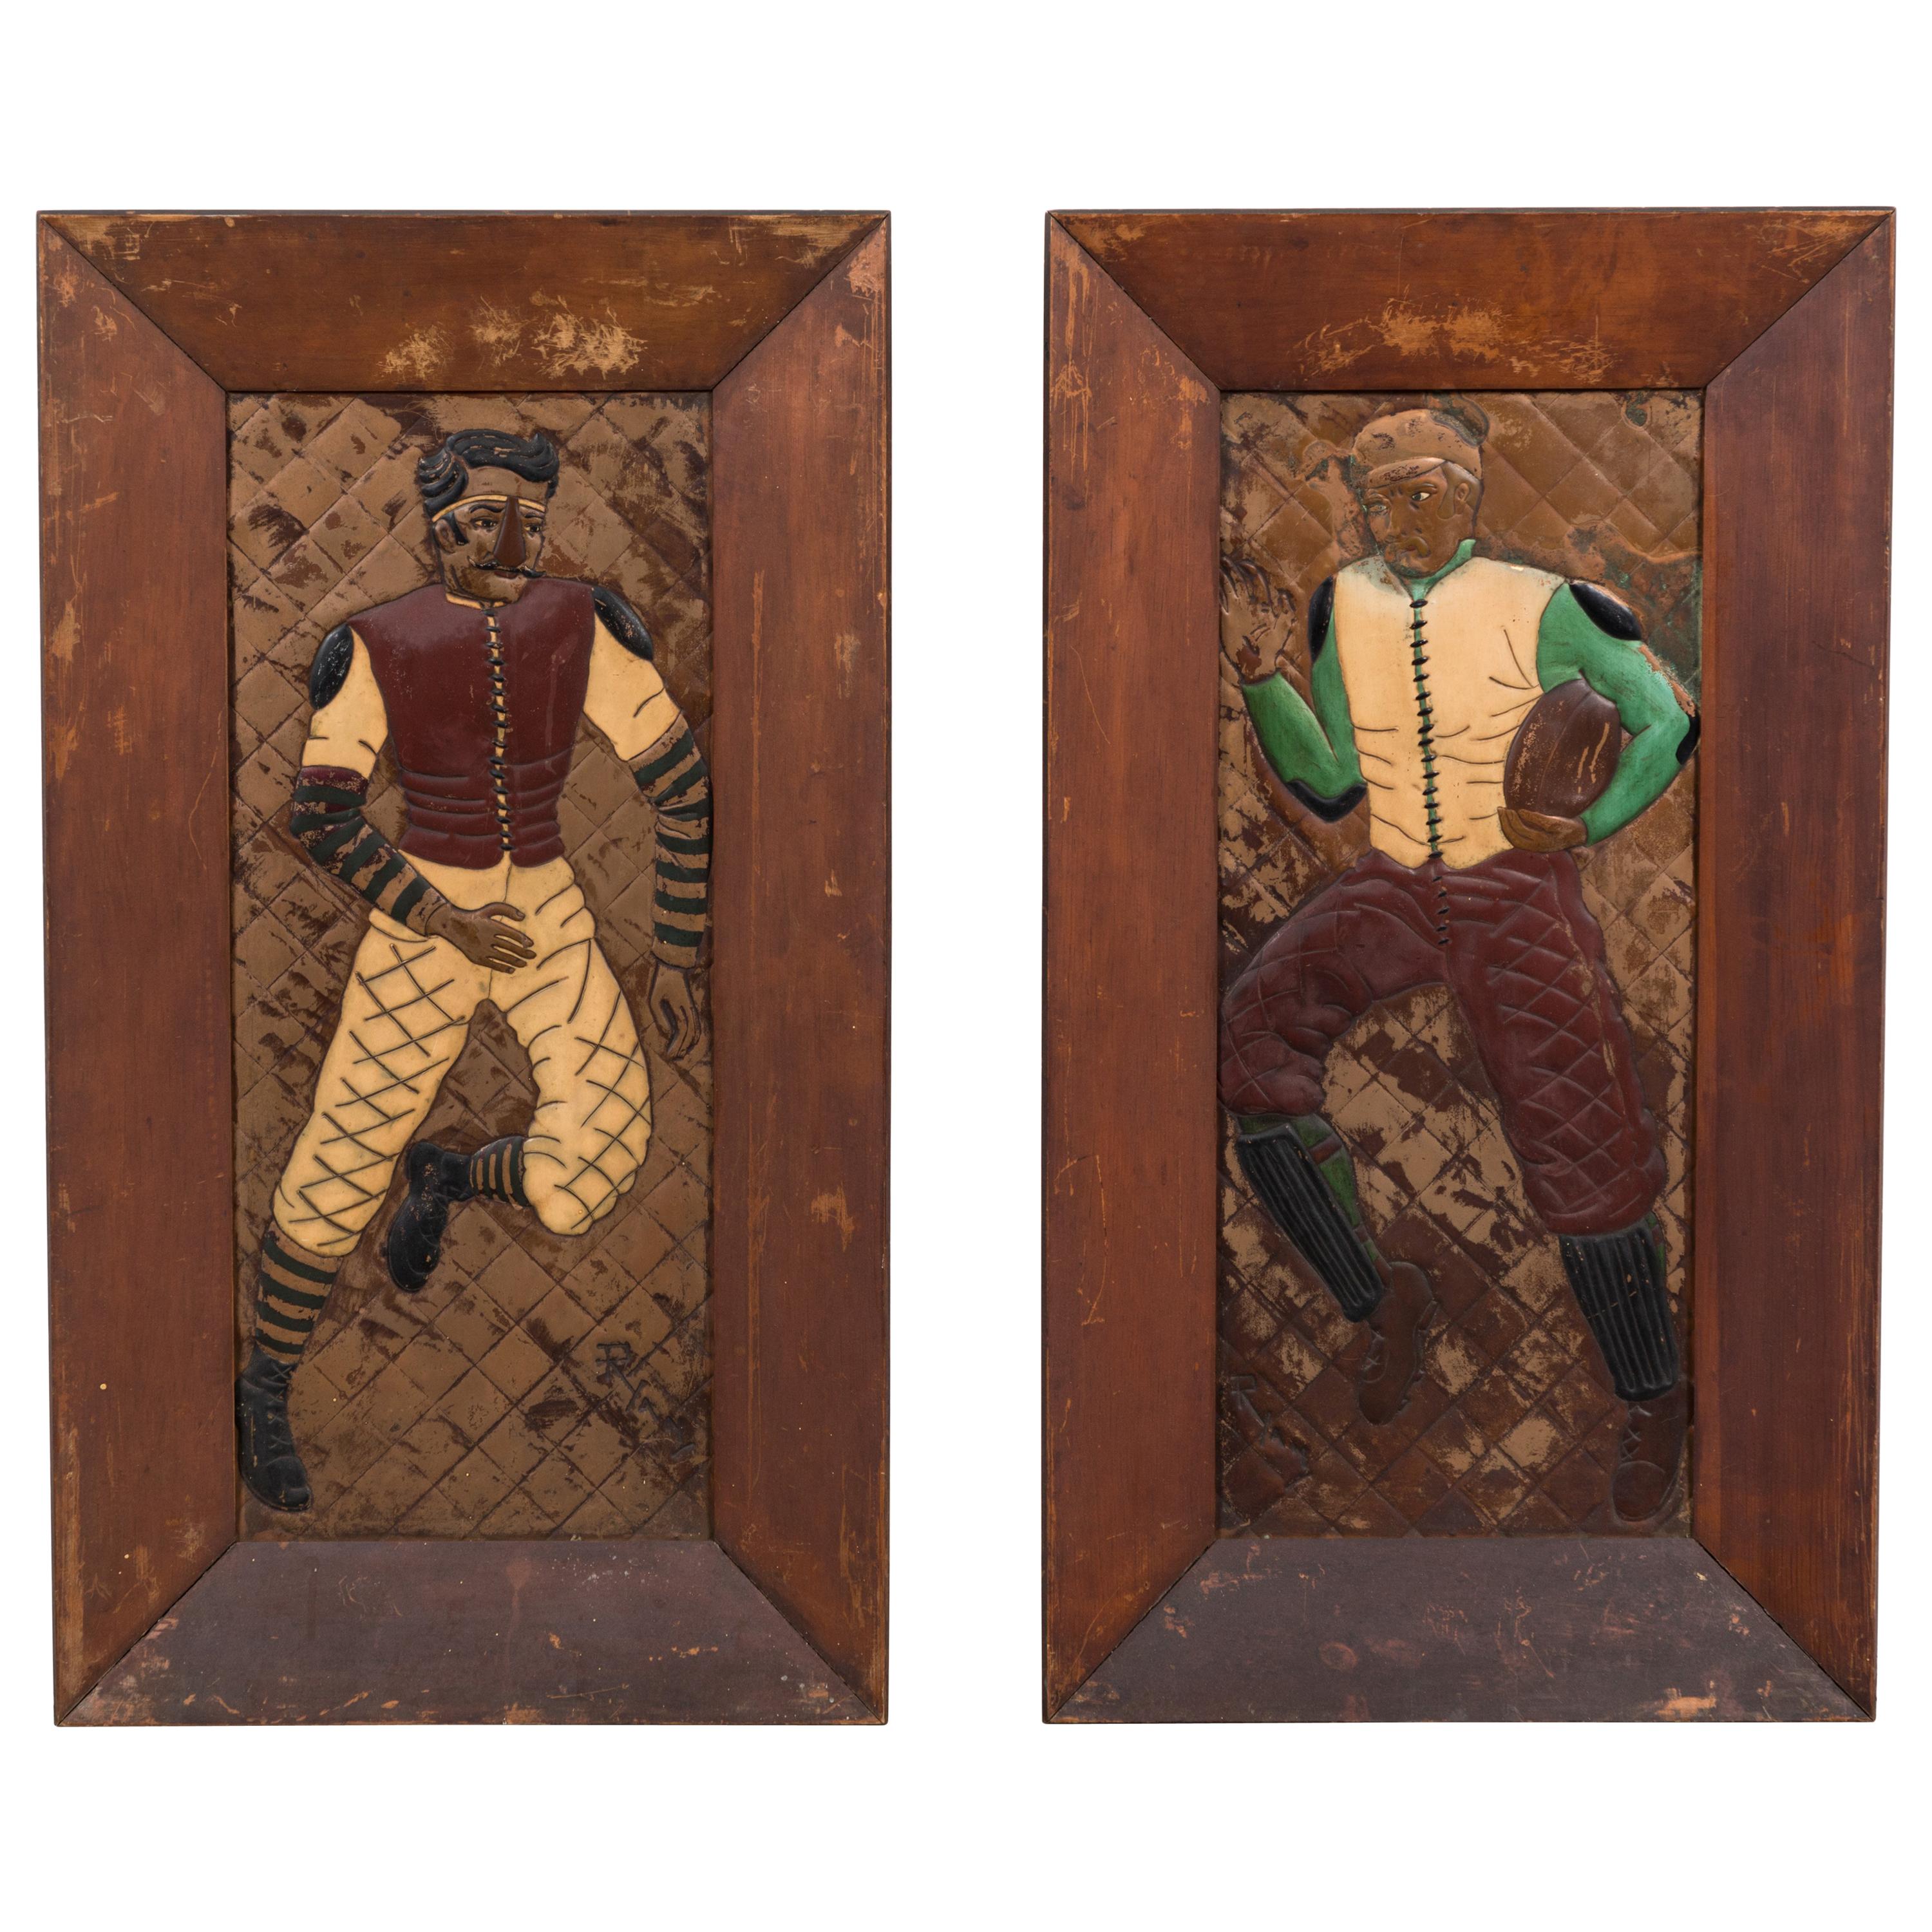 Pair of Copper Relief Football Player Wall Hangings Period Football Uniforms